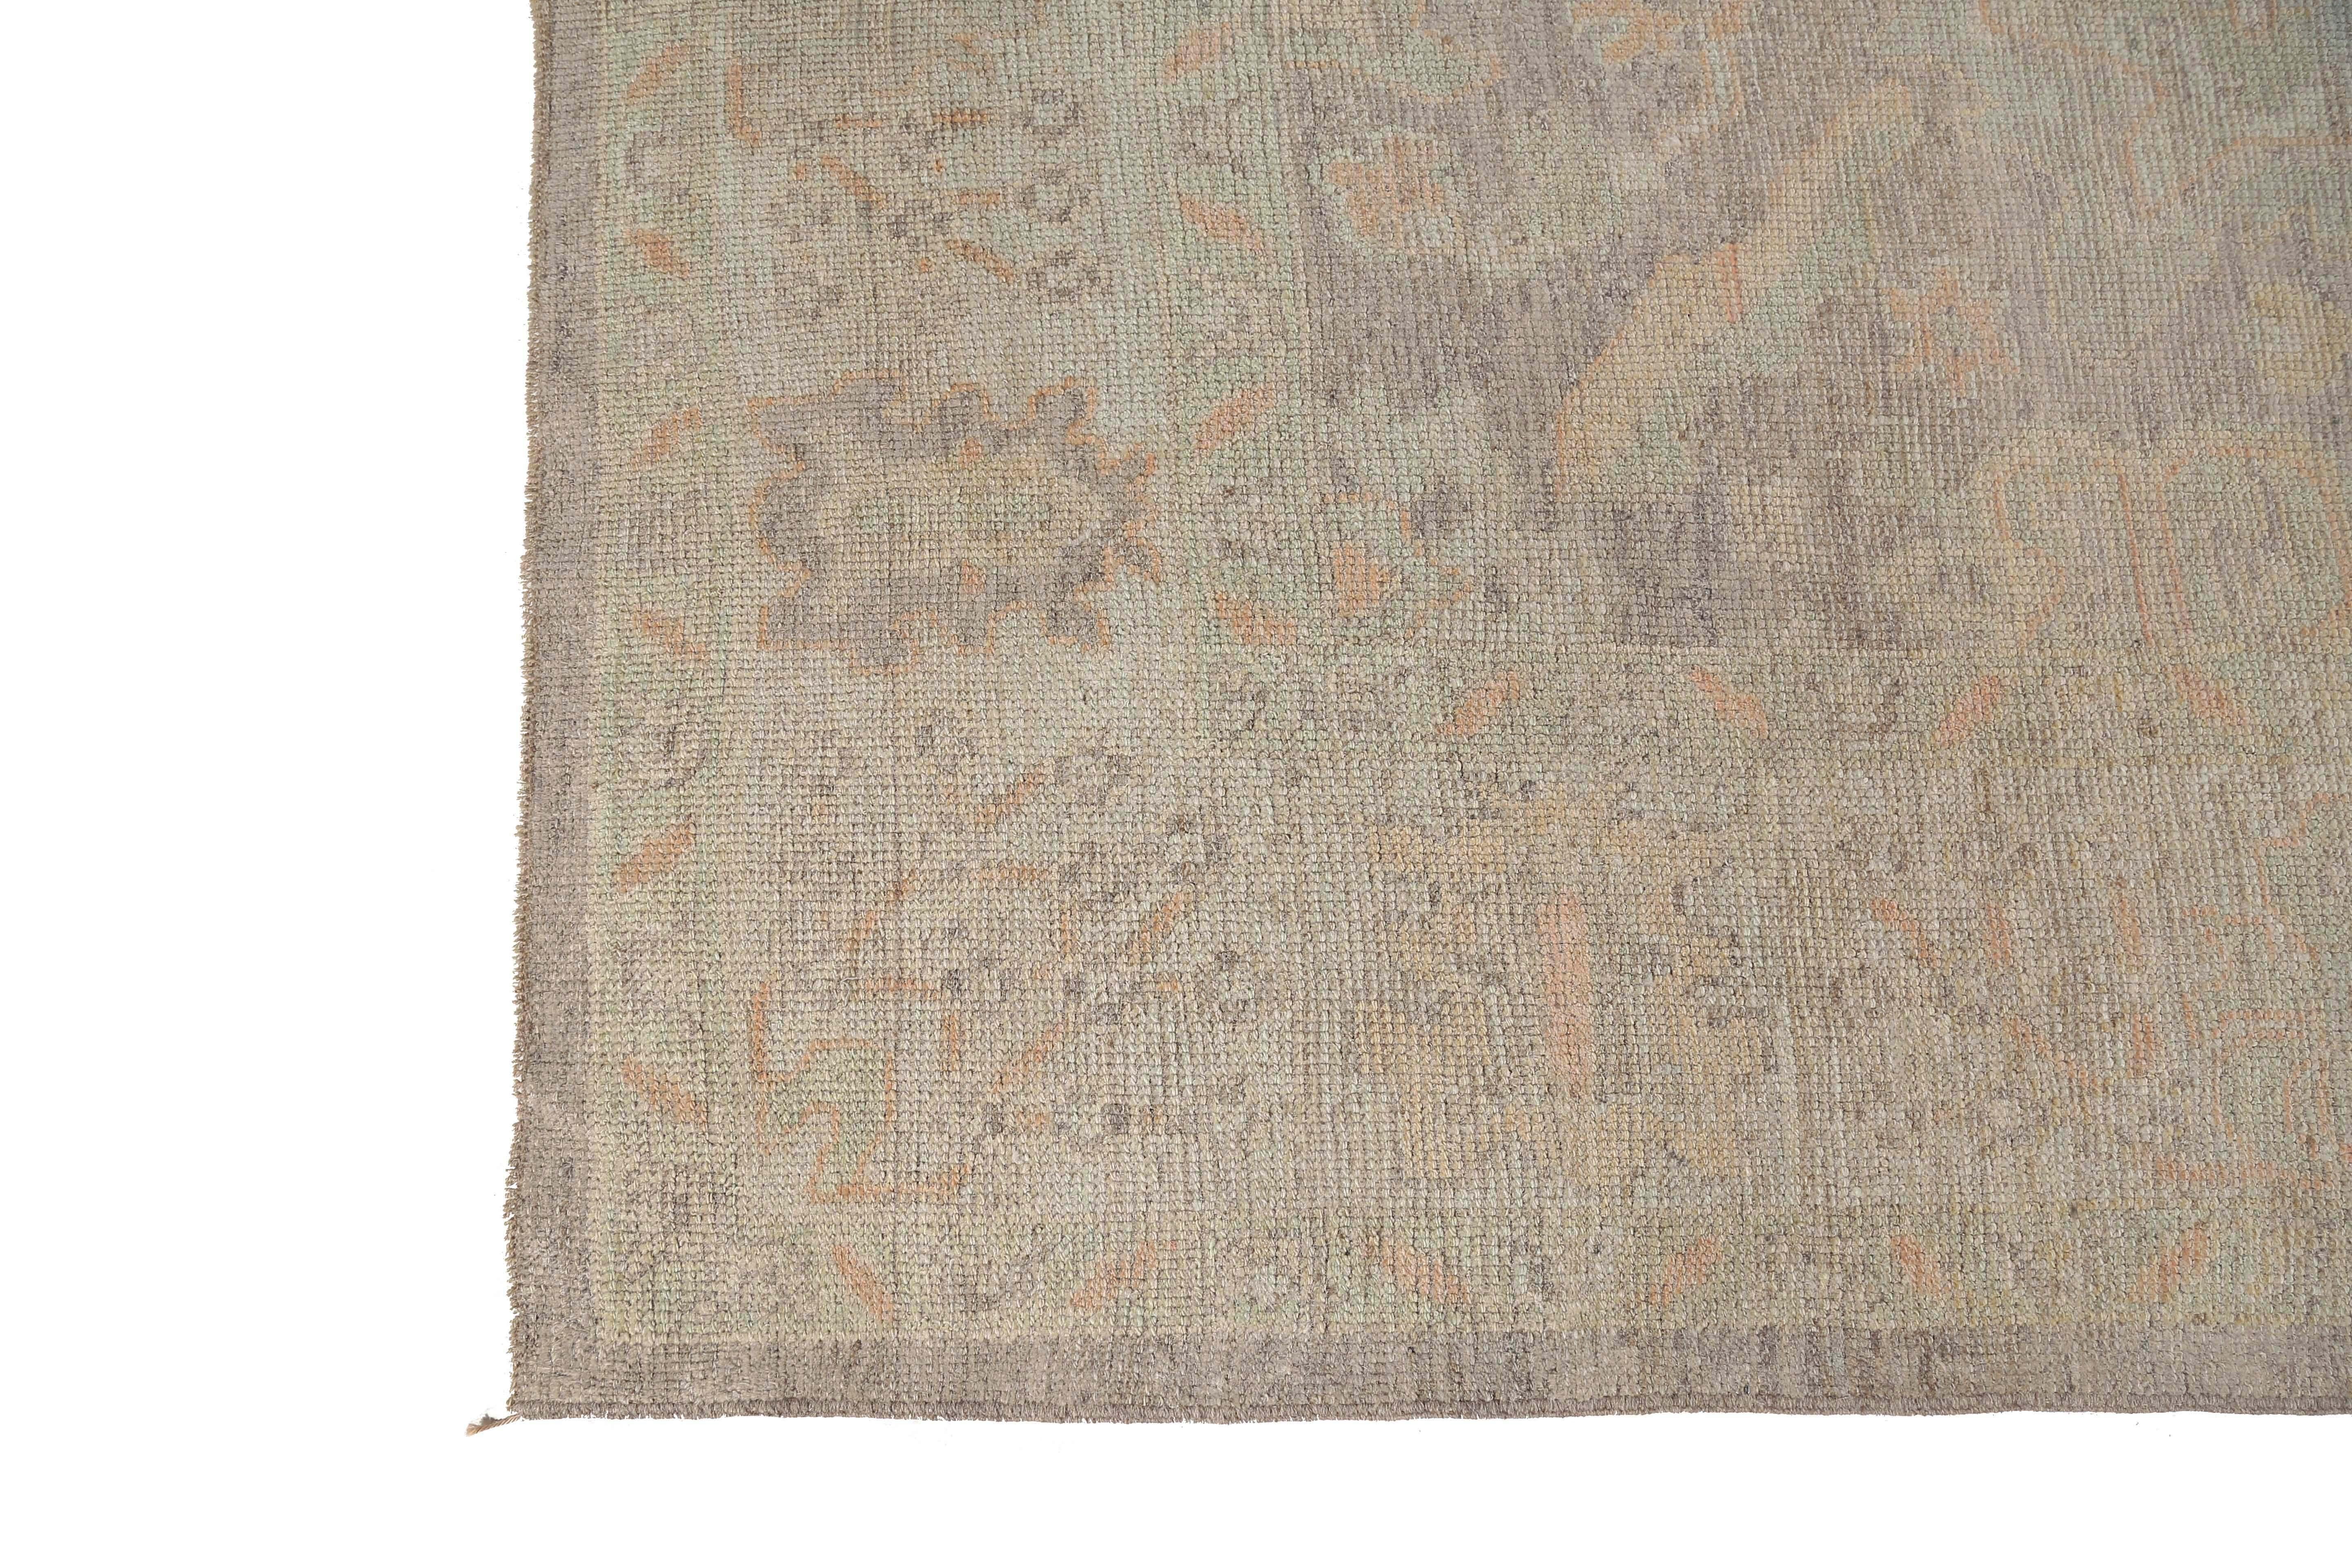 Introducing our exquisite Turkish Oushak rug, a true masterpiece of handmade craftsmanship. Measuring 6'6X10'4